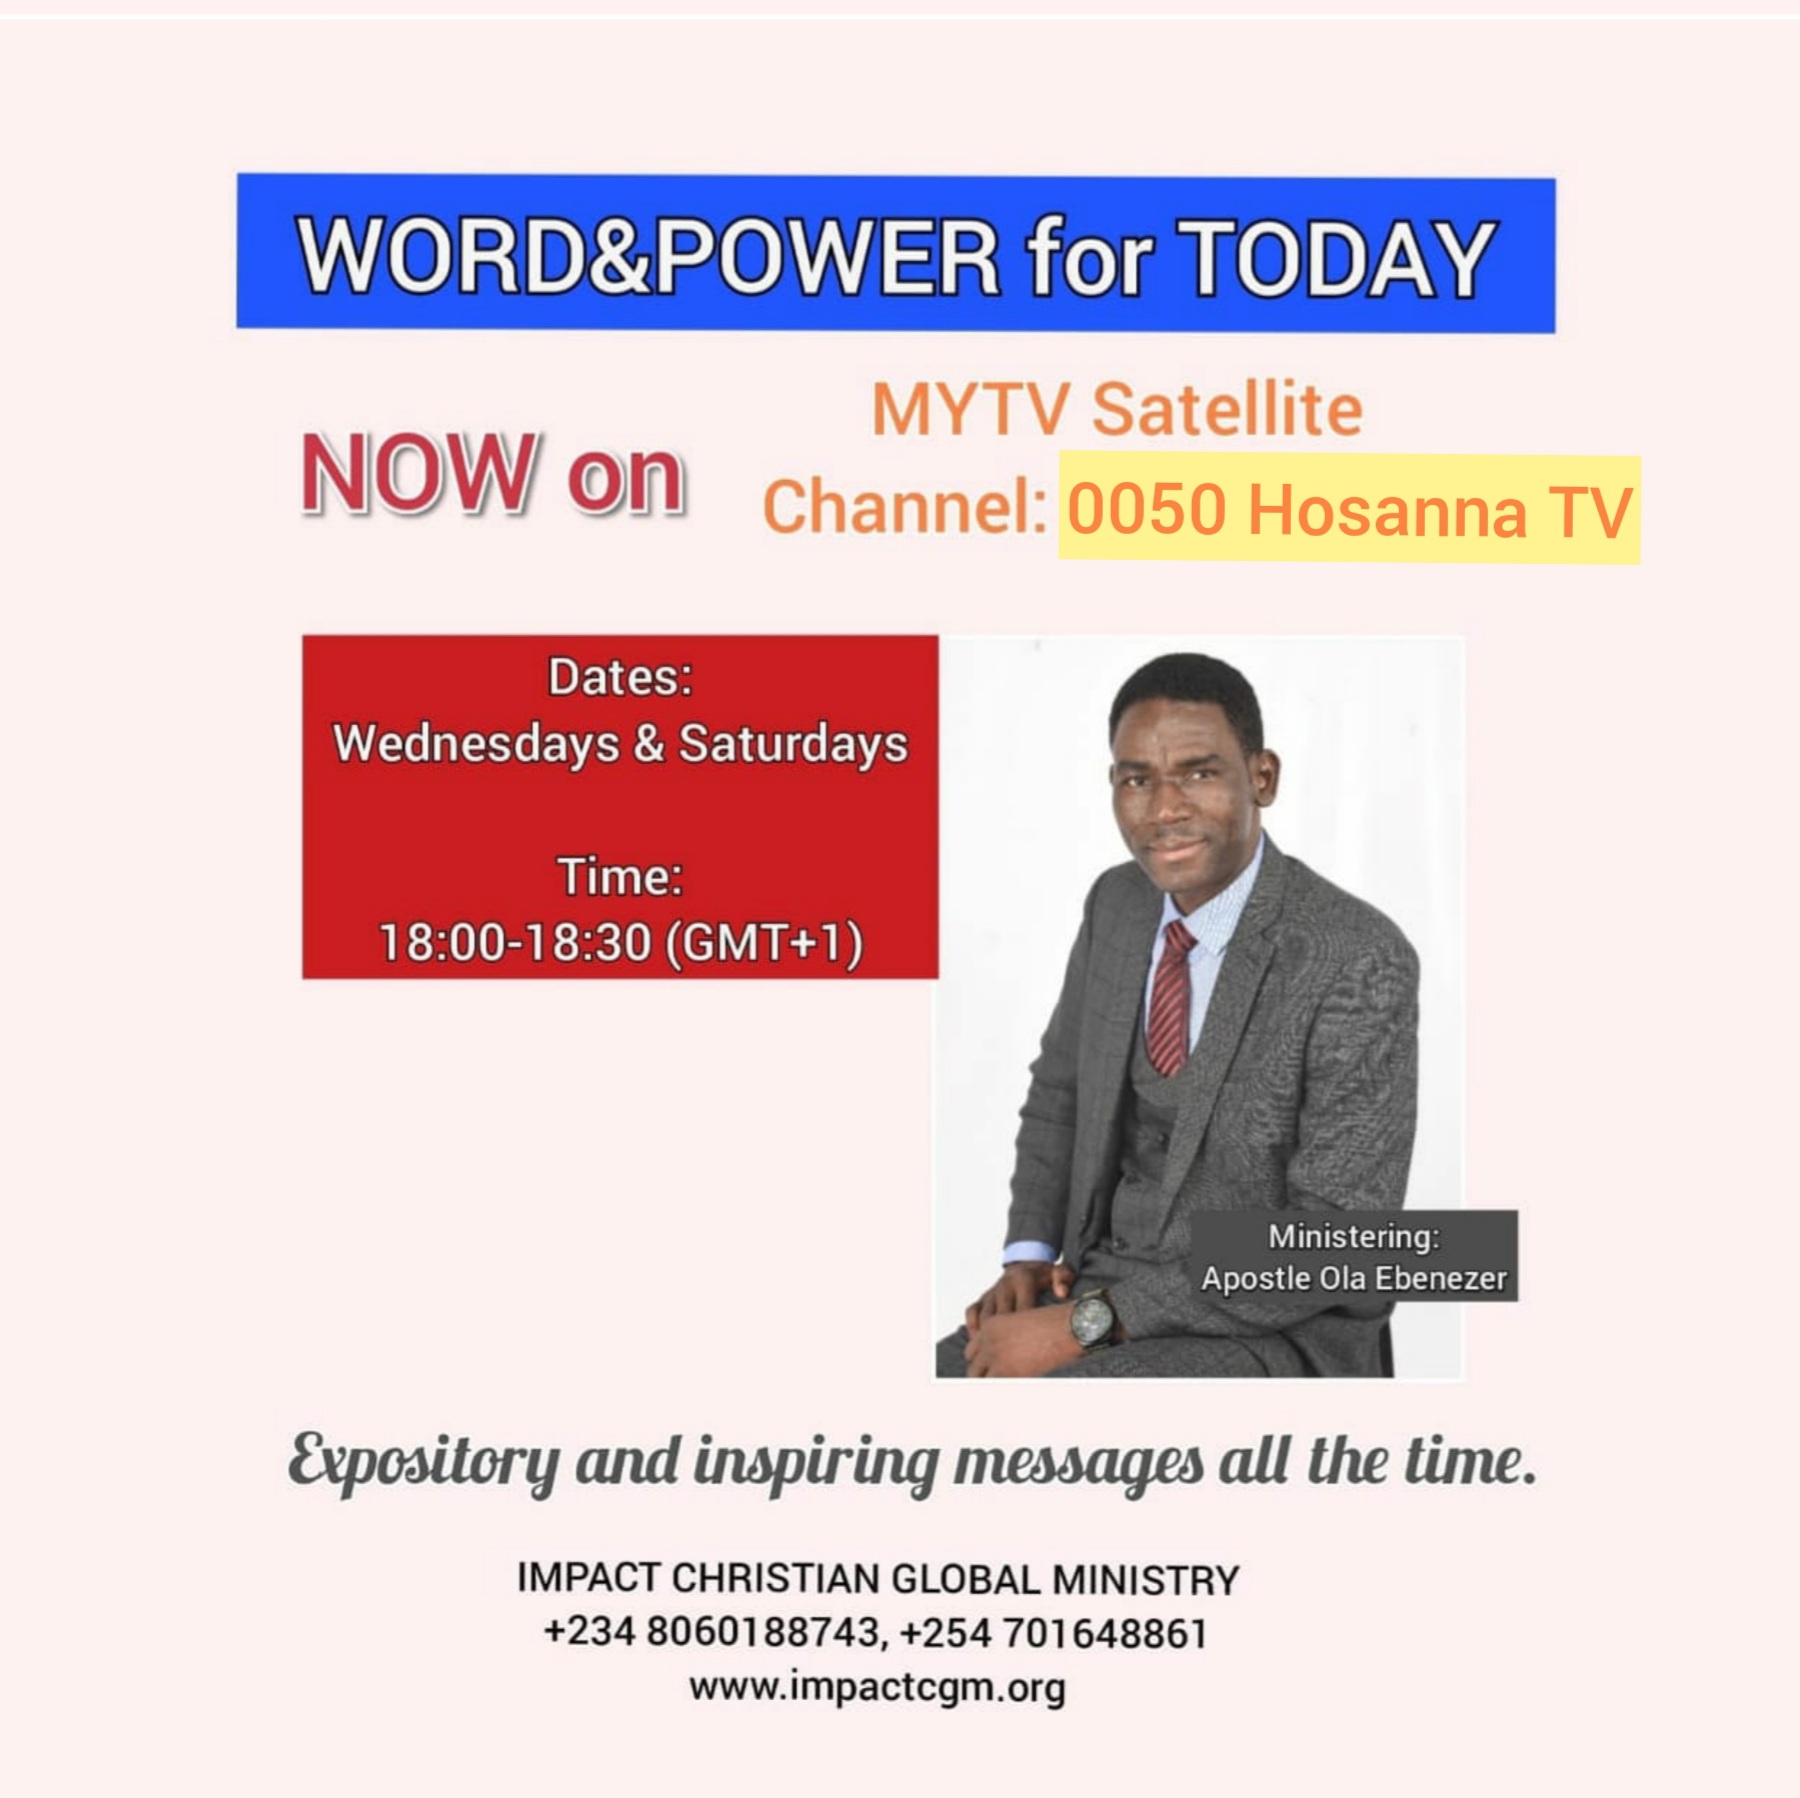 You are currently viewing WORD&POWER for TODAY, now on MYTV, Channel 0050 Hosanna TV.